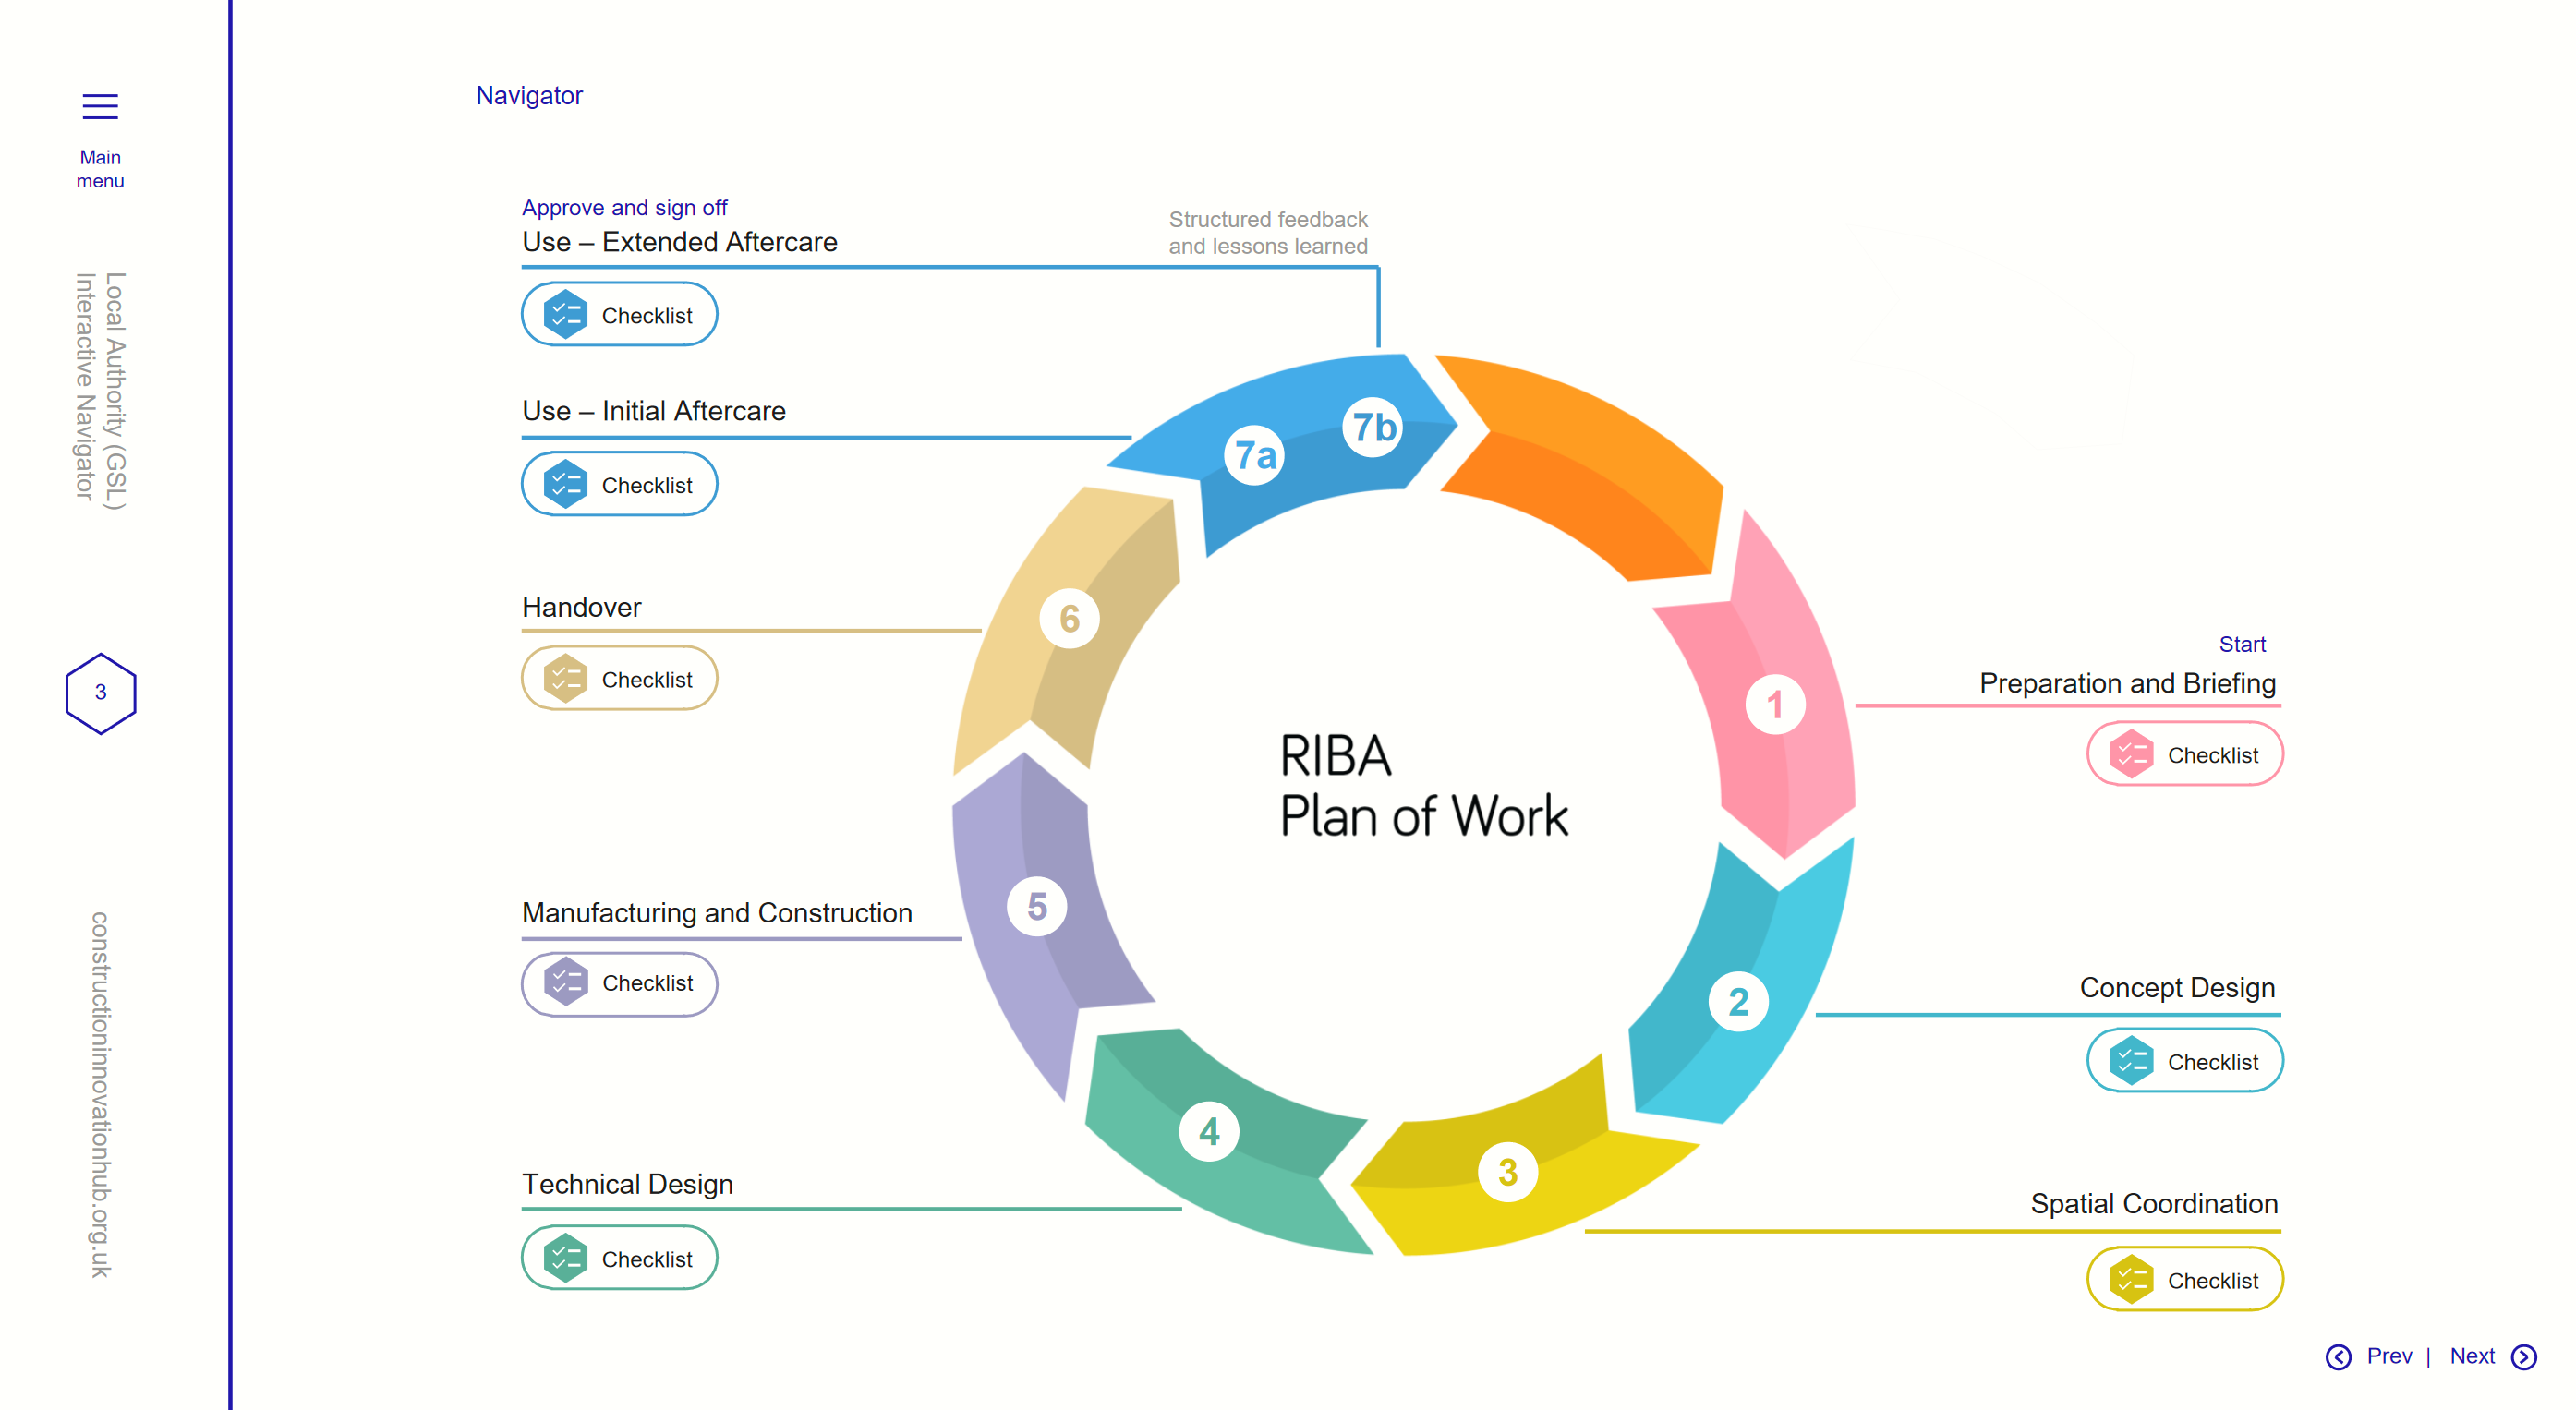 Diagram showing how the GSL soft landings process aligns with the RIBA Plan of Work. Source: Local Authority GSL Interactive Navigator 